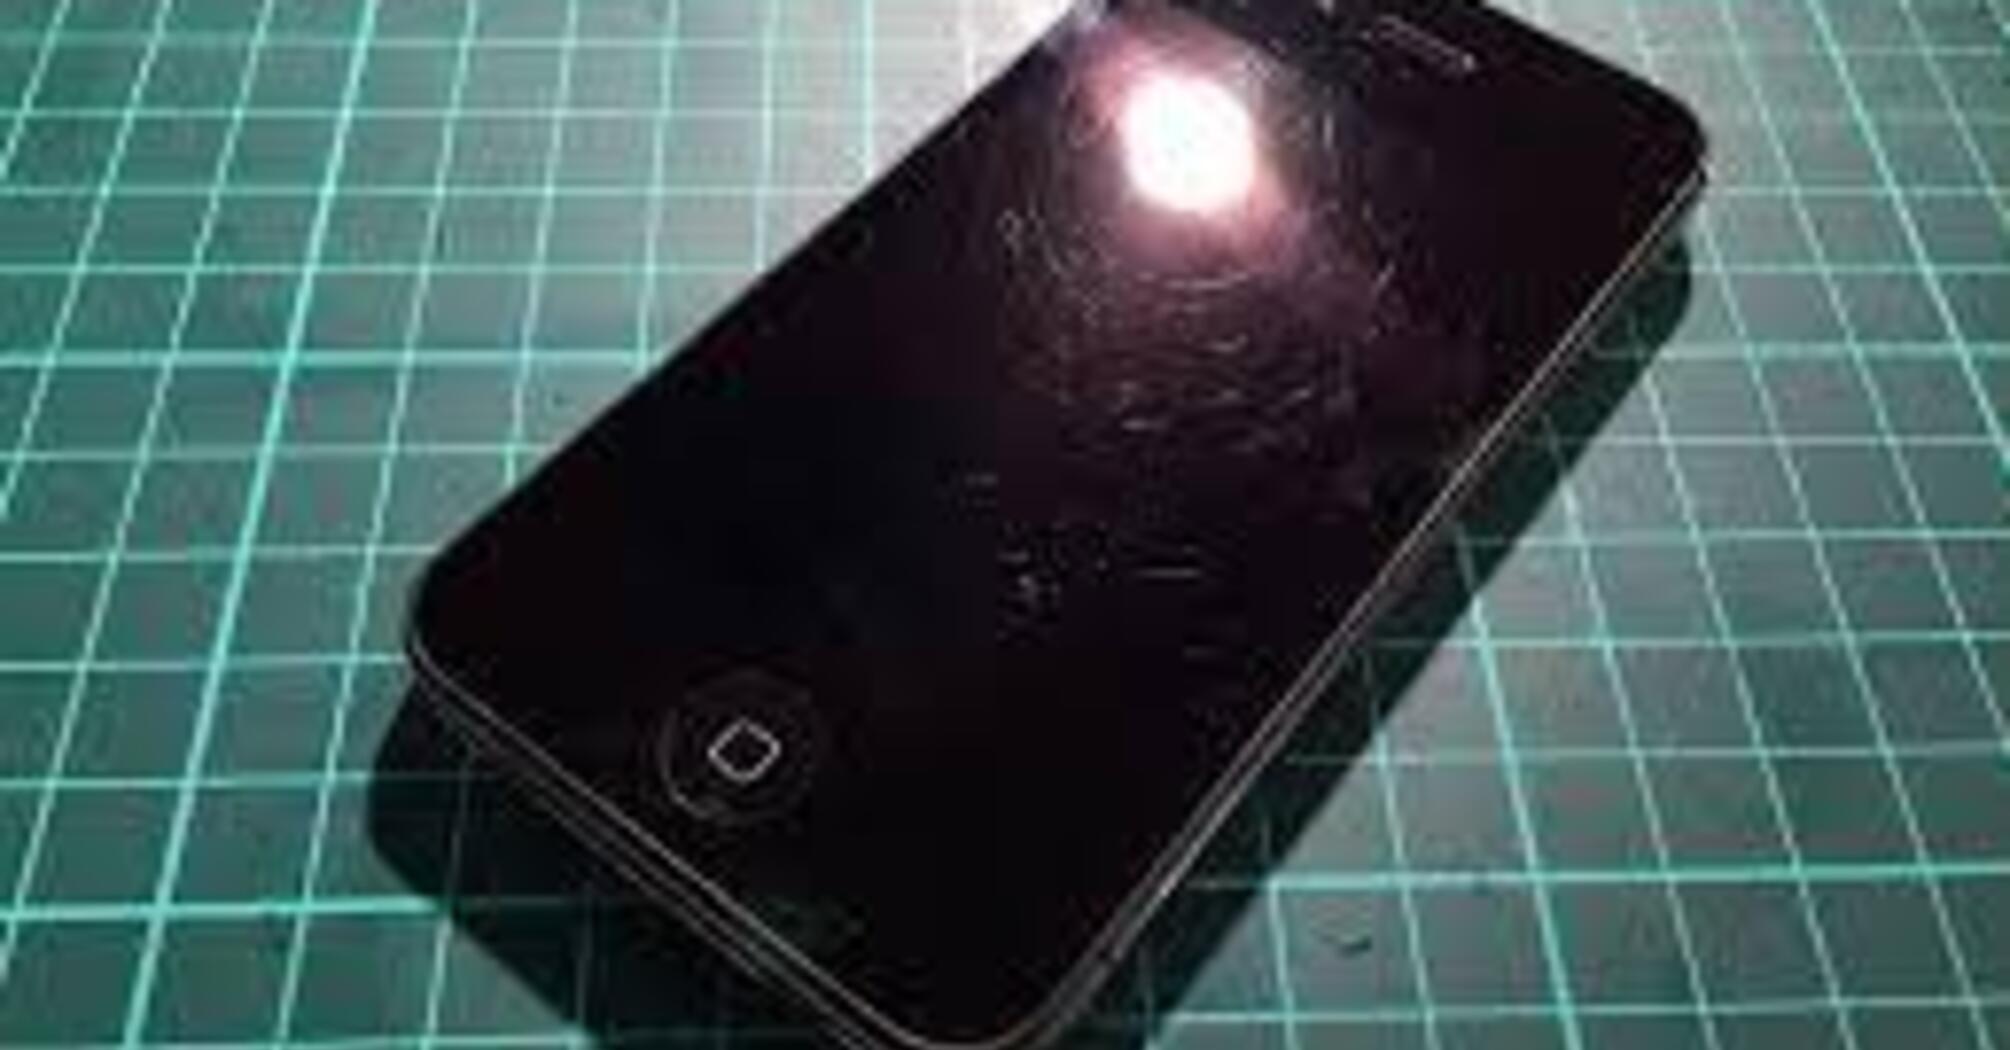 How to prevent scratches on smartphones?